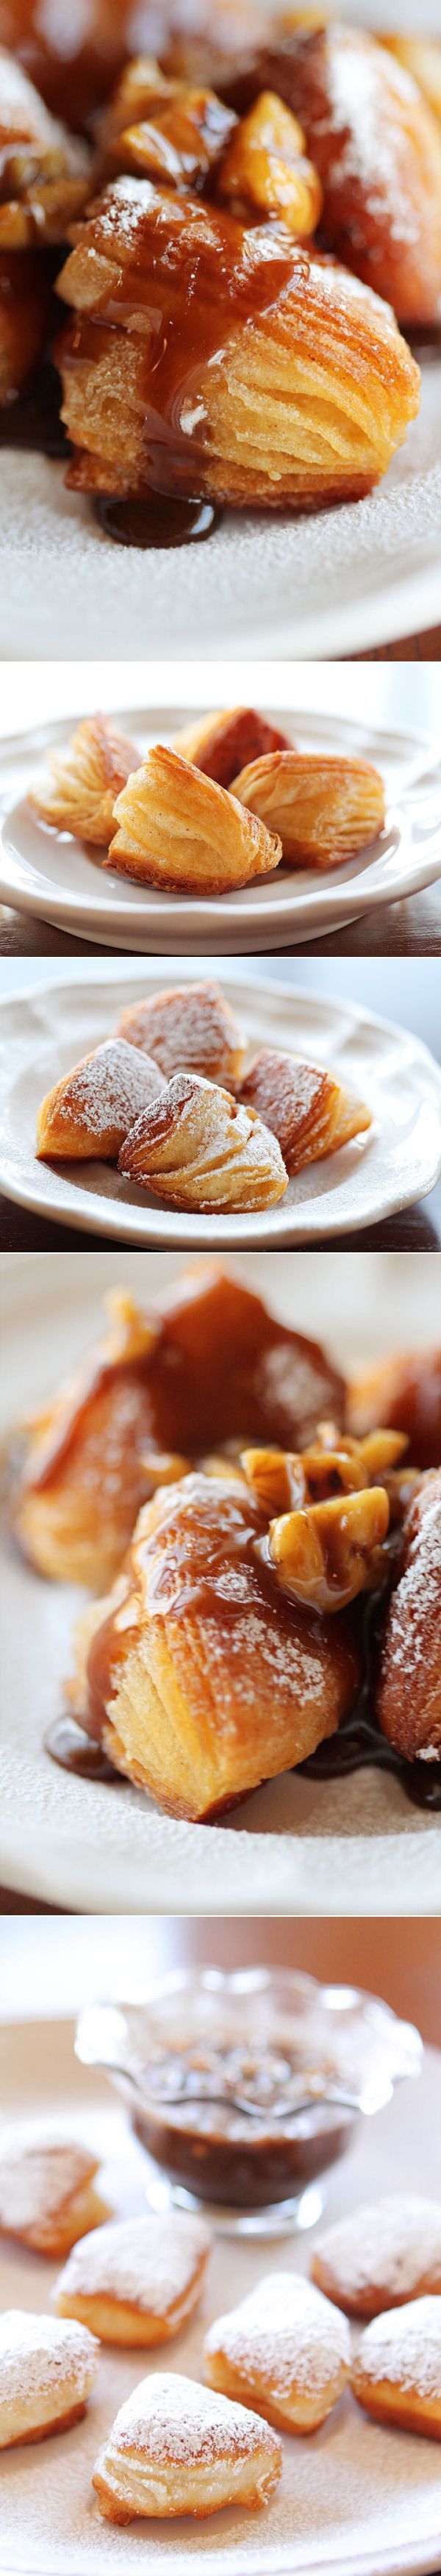 Biscuit Beignets with Praline Sauce. You must make this at least once in your lifetime. A true southern treat!